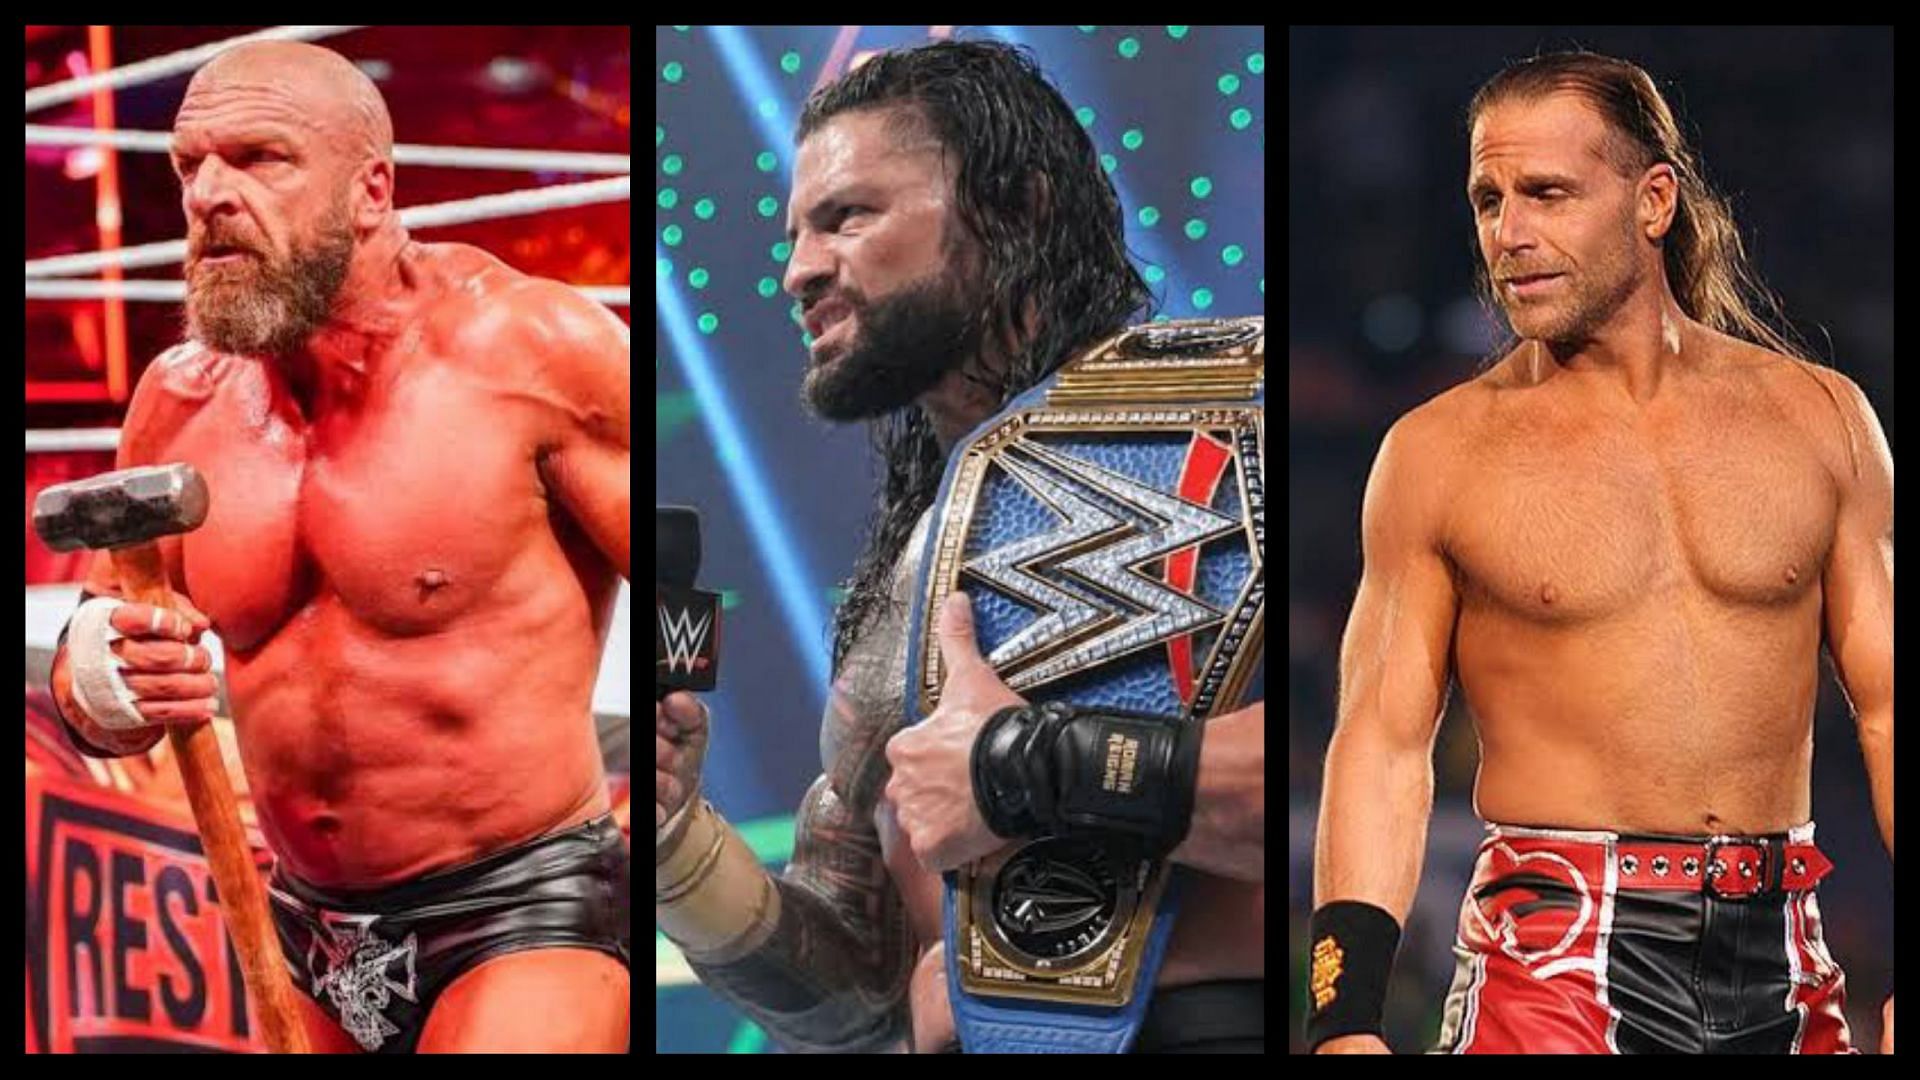 These superstars have been a part of the most WrestleMania main event